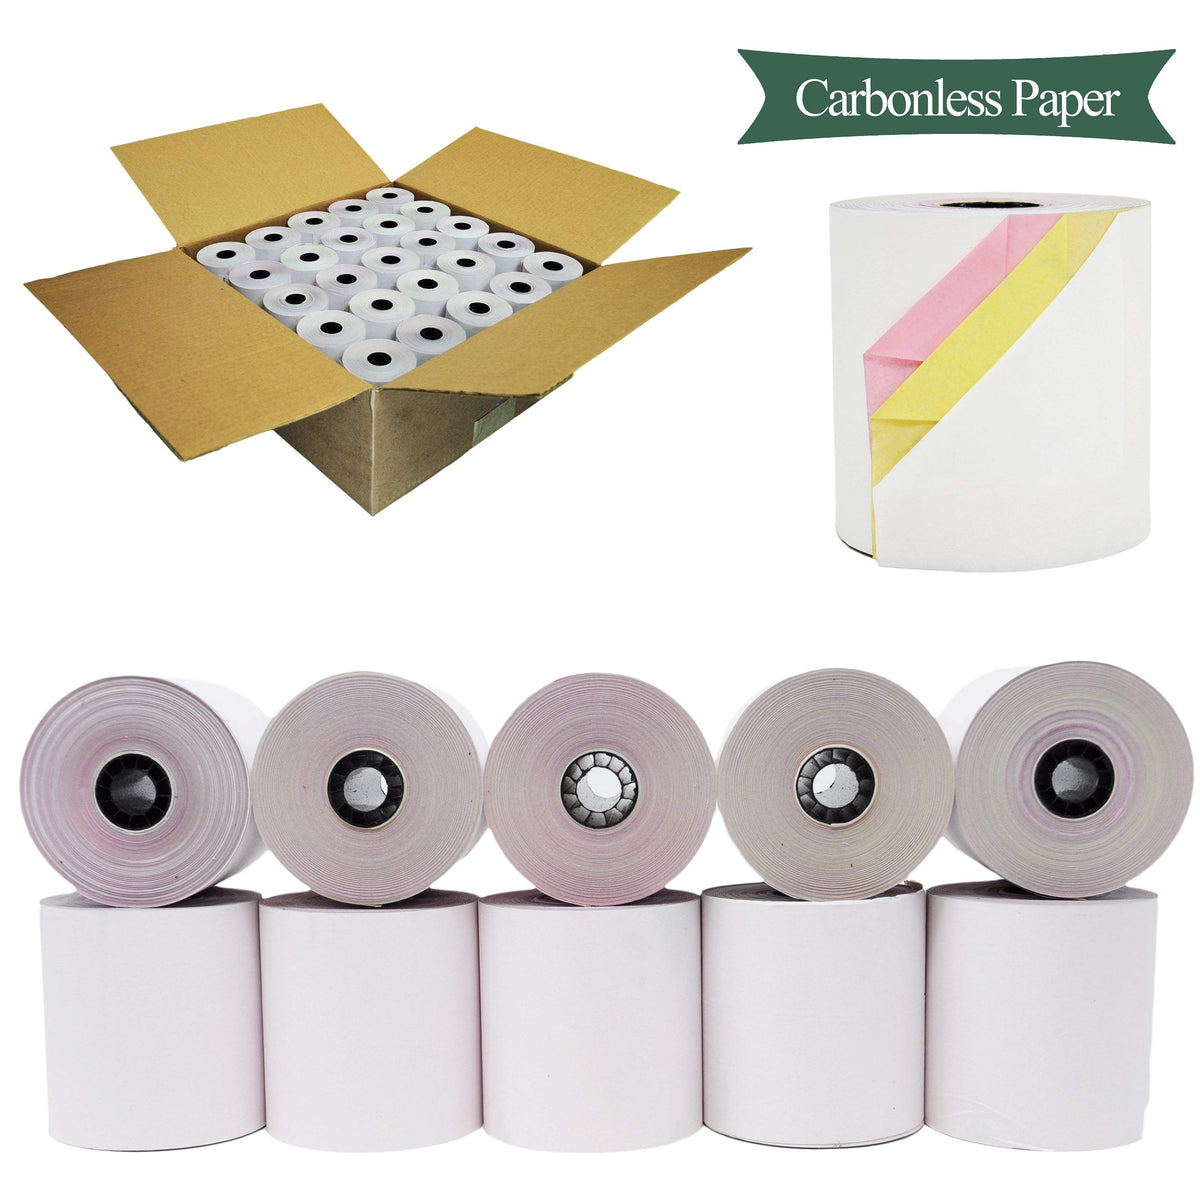 2-ply Carbonless Carbonless Cash Register Paper Box of 50 Rolls Made in USA From BuyRegisterRolls 3.0 x 3.0 inches x 90 feet 